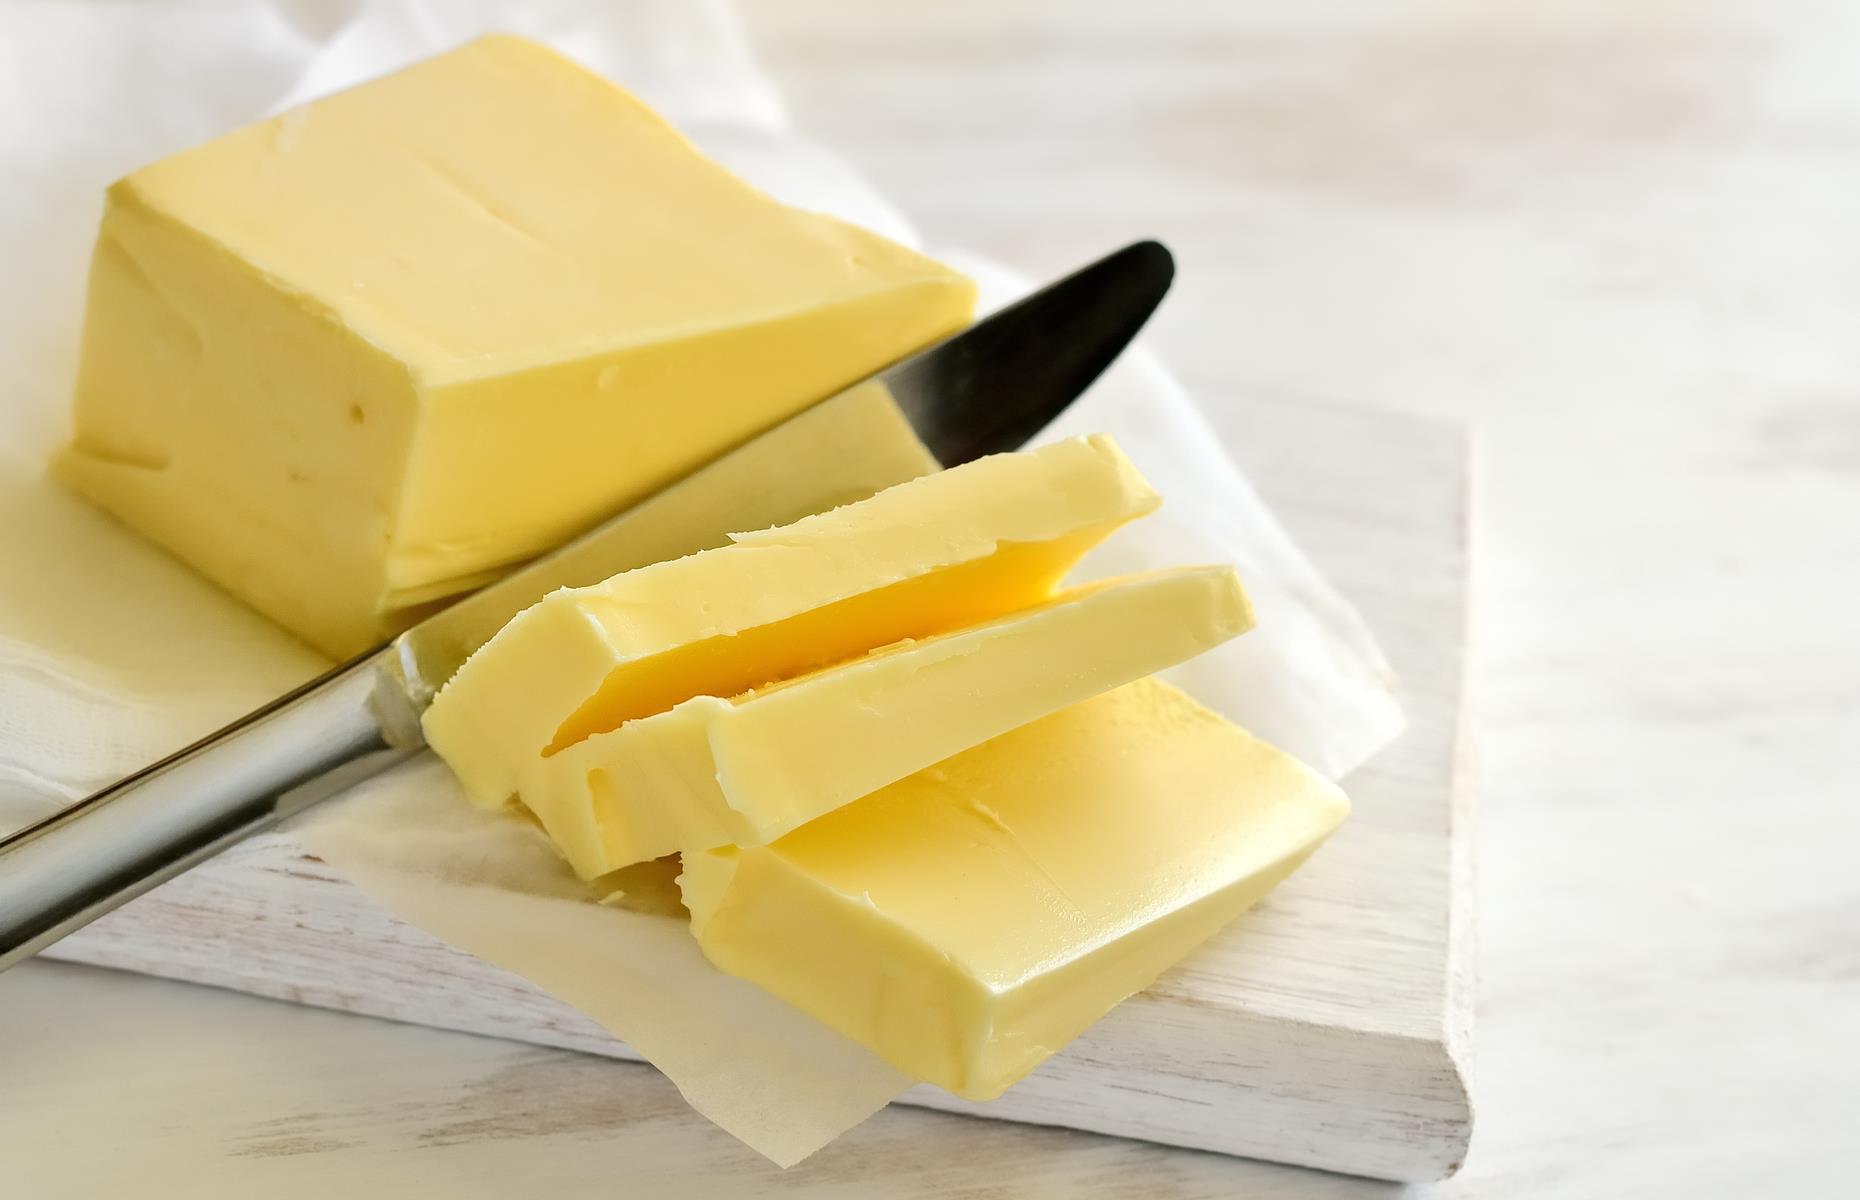 Europe's butter is now spread more thinly